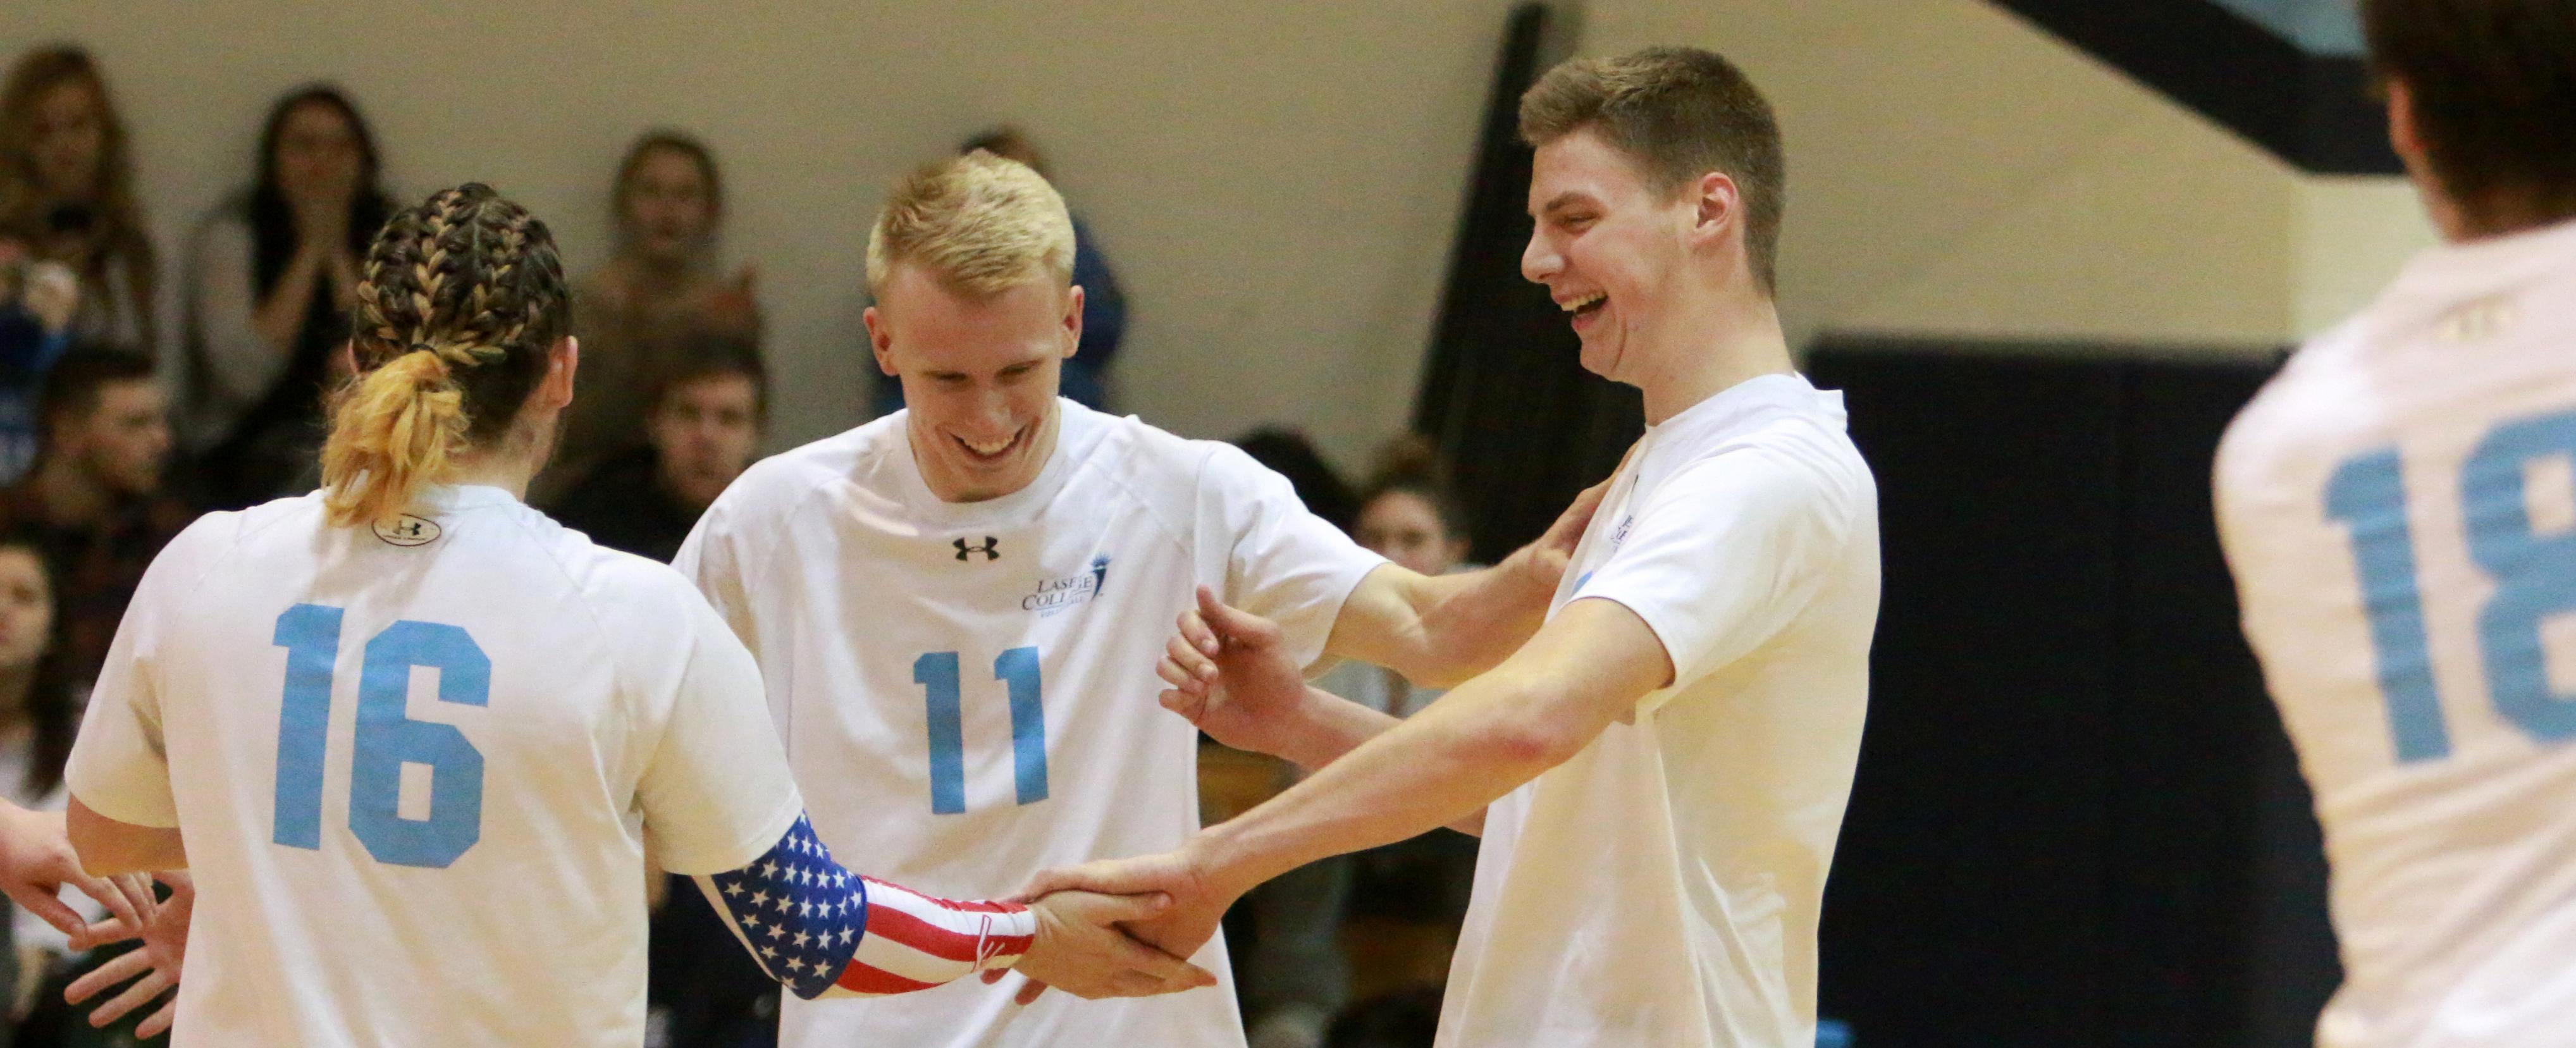 Men's Volleyball Remains Unbeaten in GNAC Action with 3-0 Sweep of Albertus